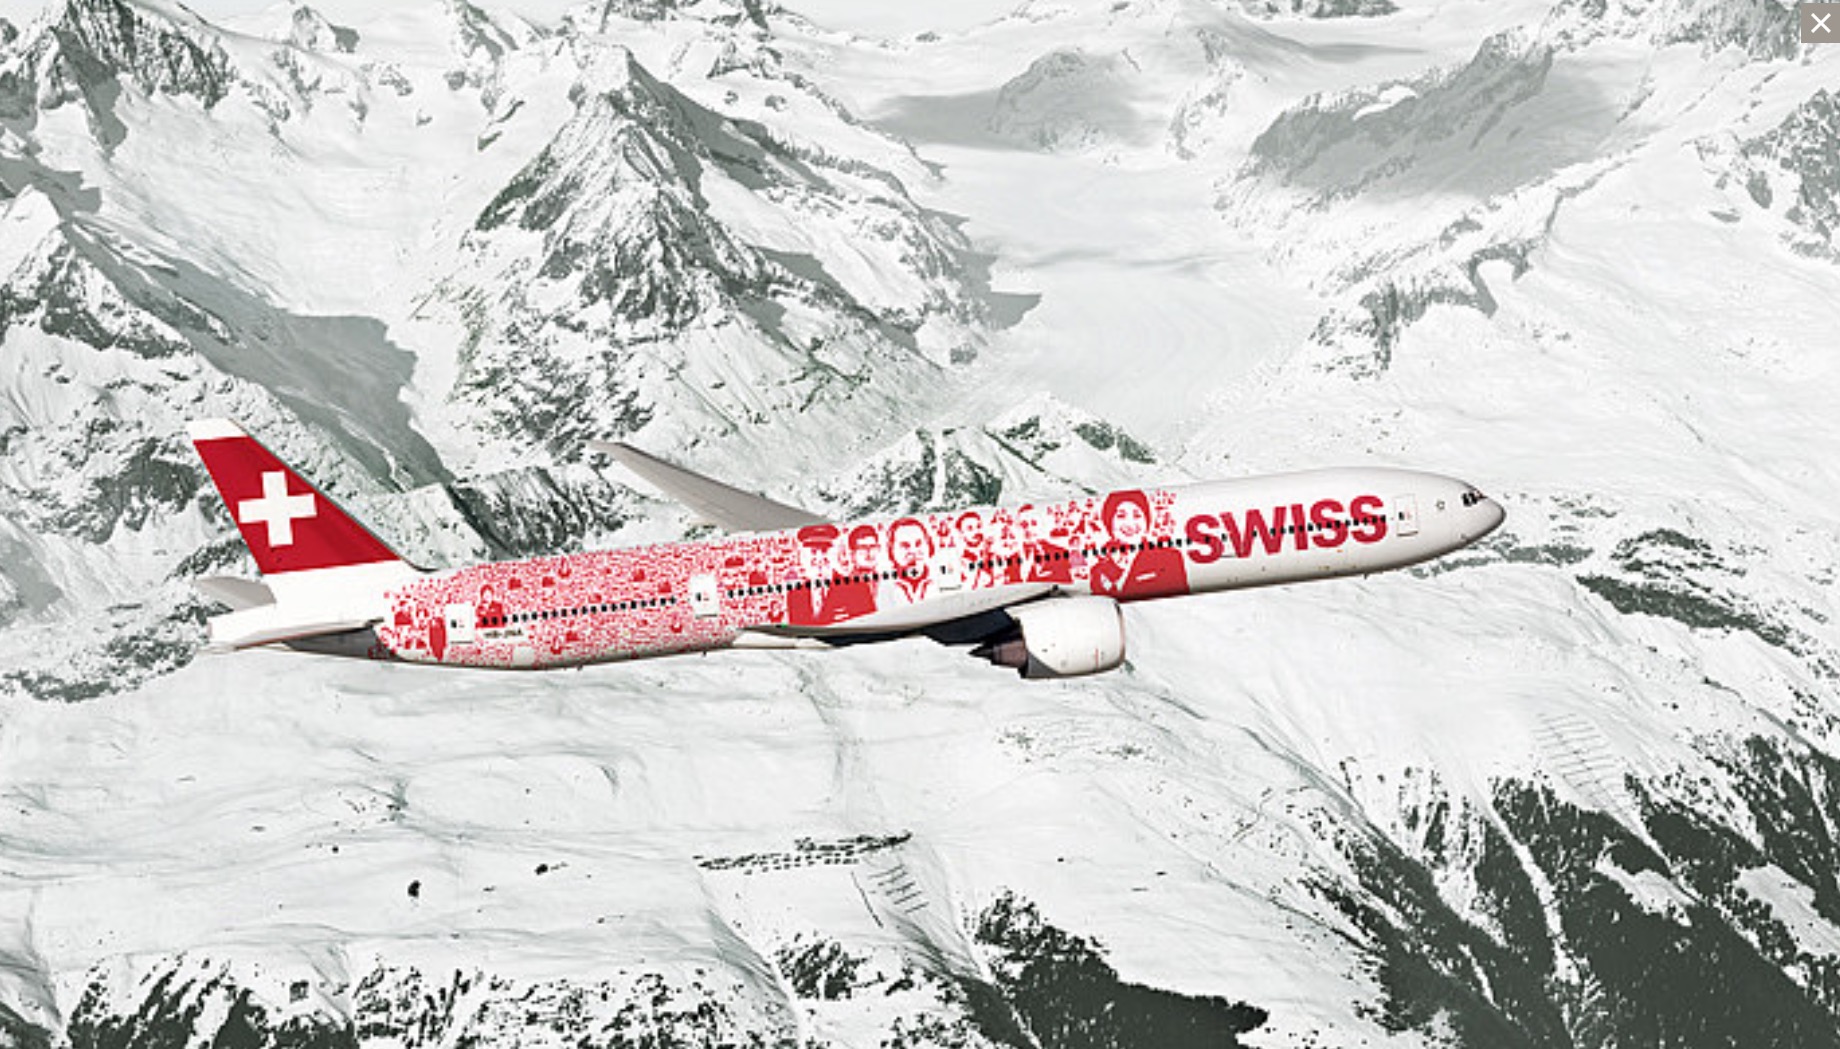 SWISS' first 777 will sport this livery.